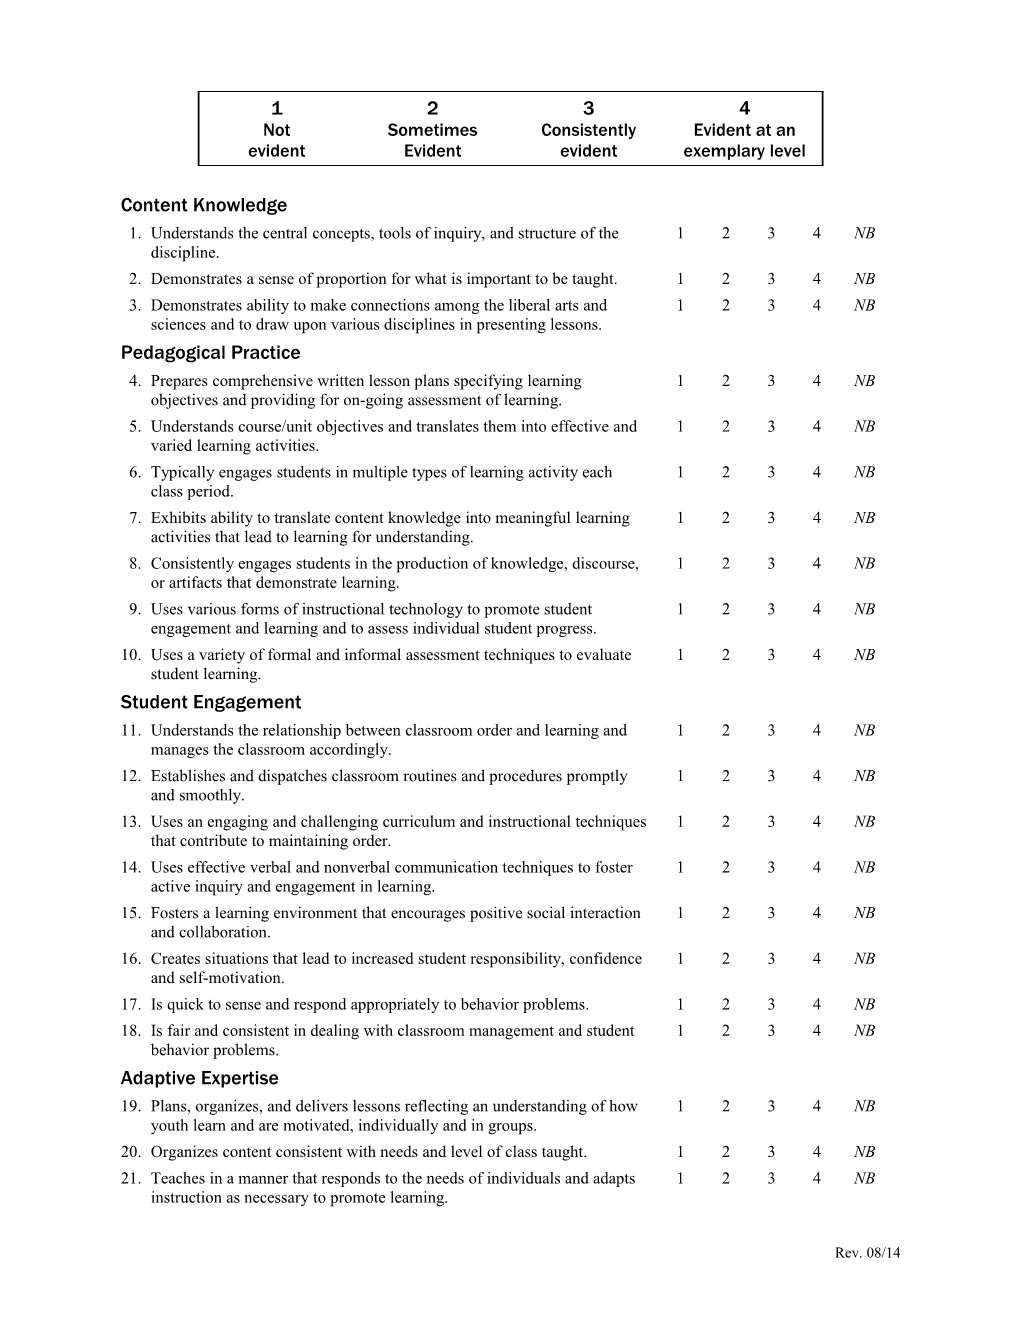 Student Teaching Evaluation (Conservatory)